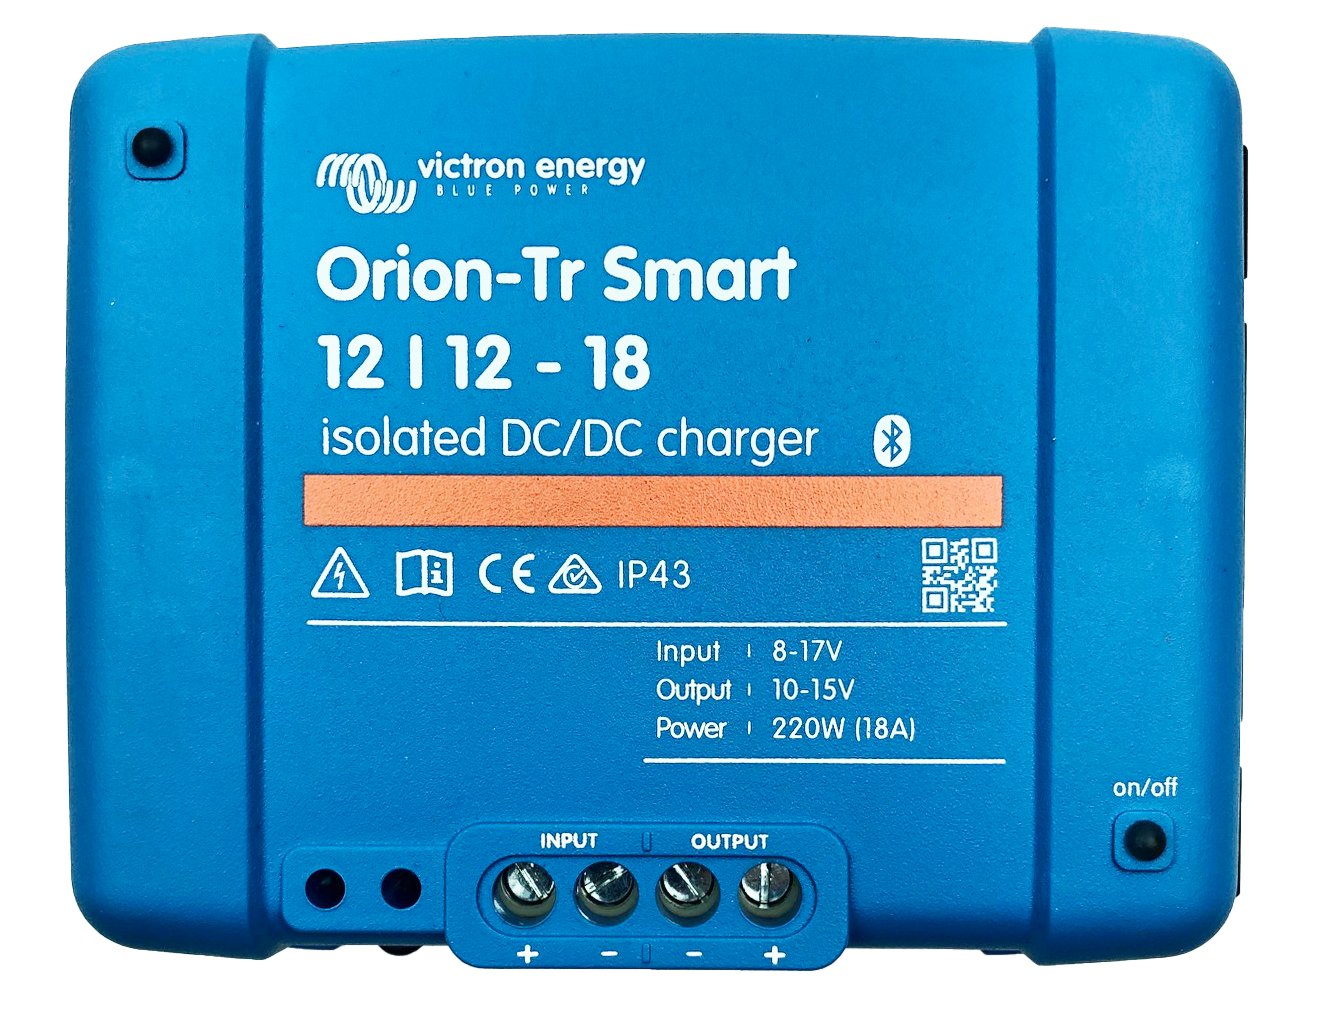 Does the ori121222120 charger come with Bluetooth capability?